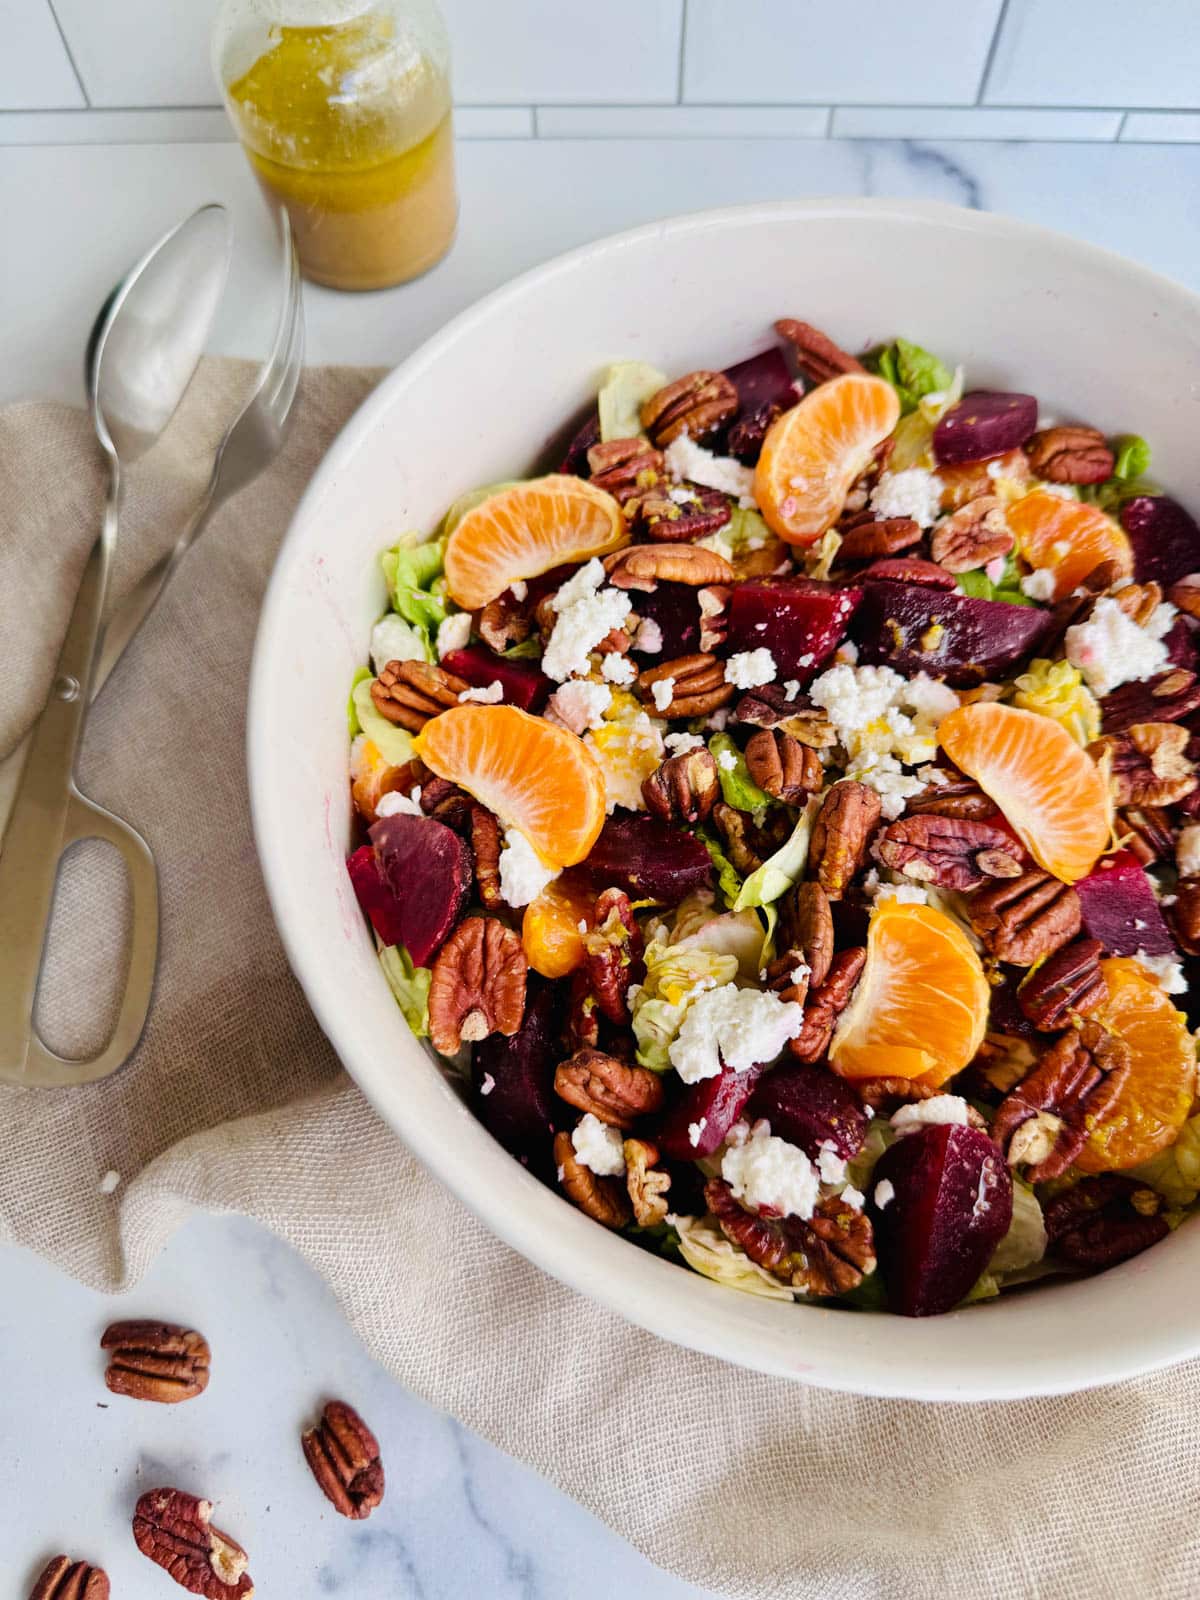 Beet, lettuce, orange sections, feta, and pecans with balsamic dressing in a white bowl.